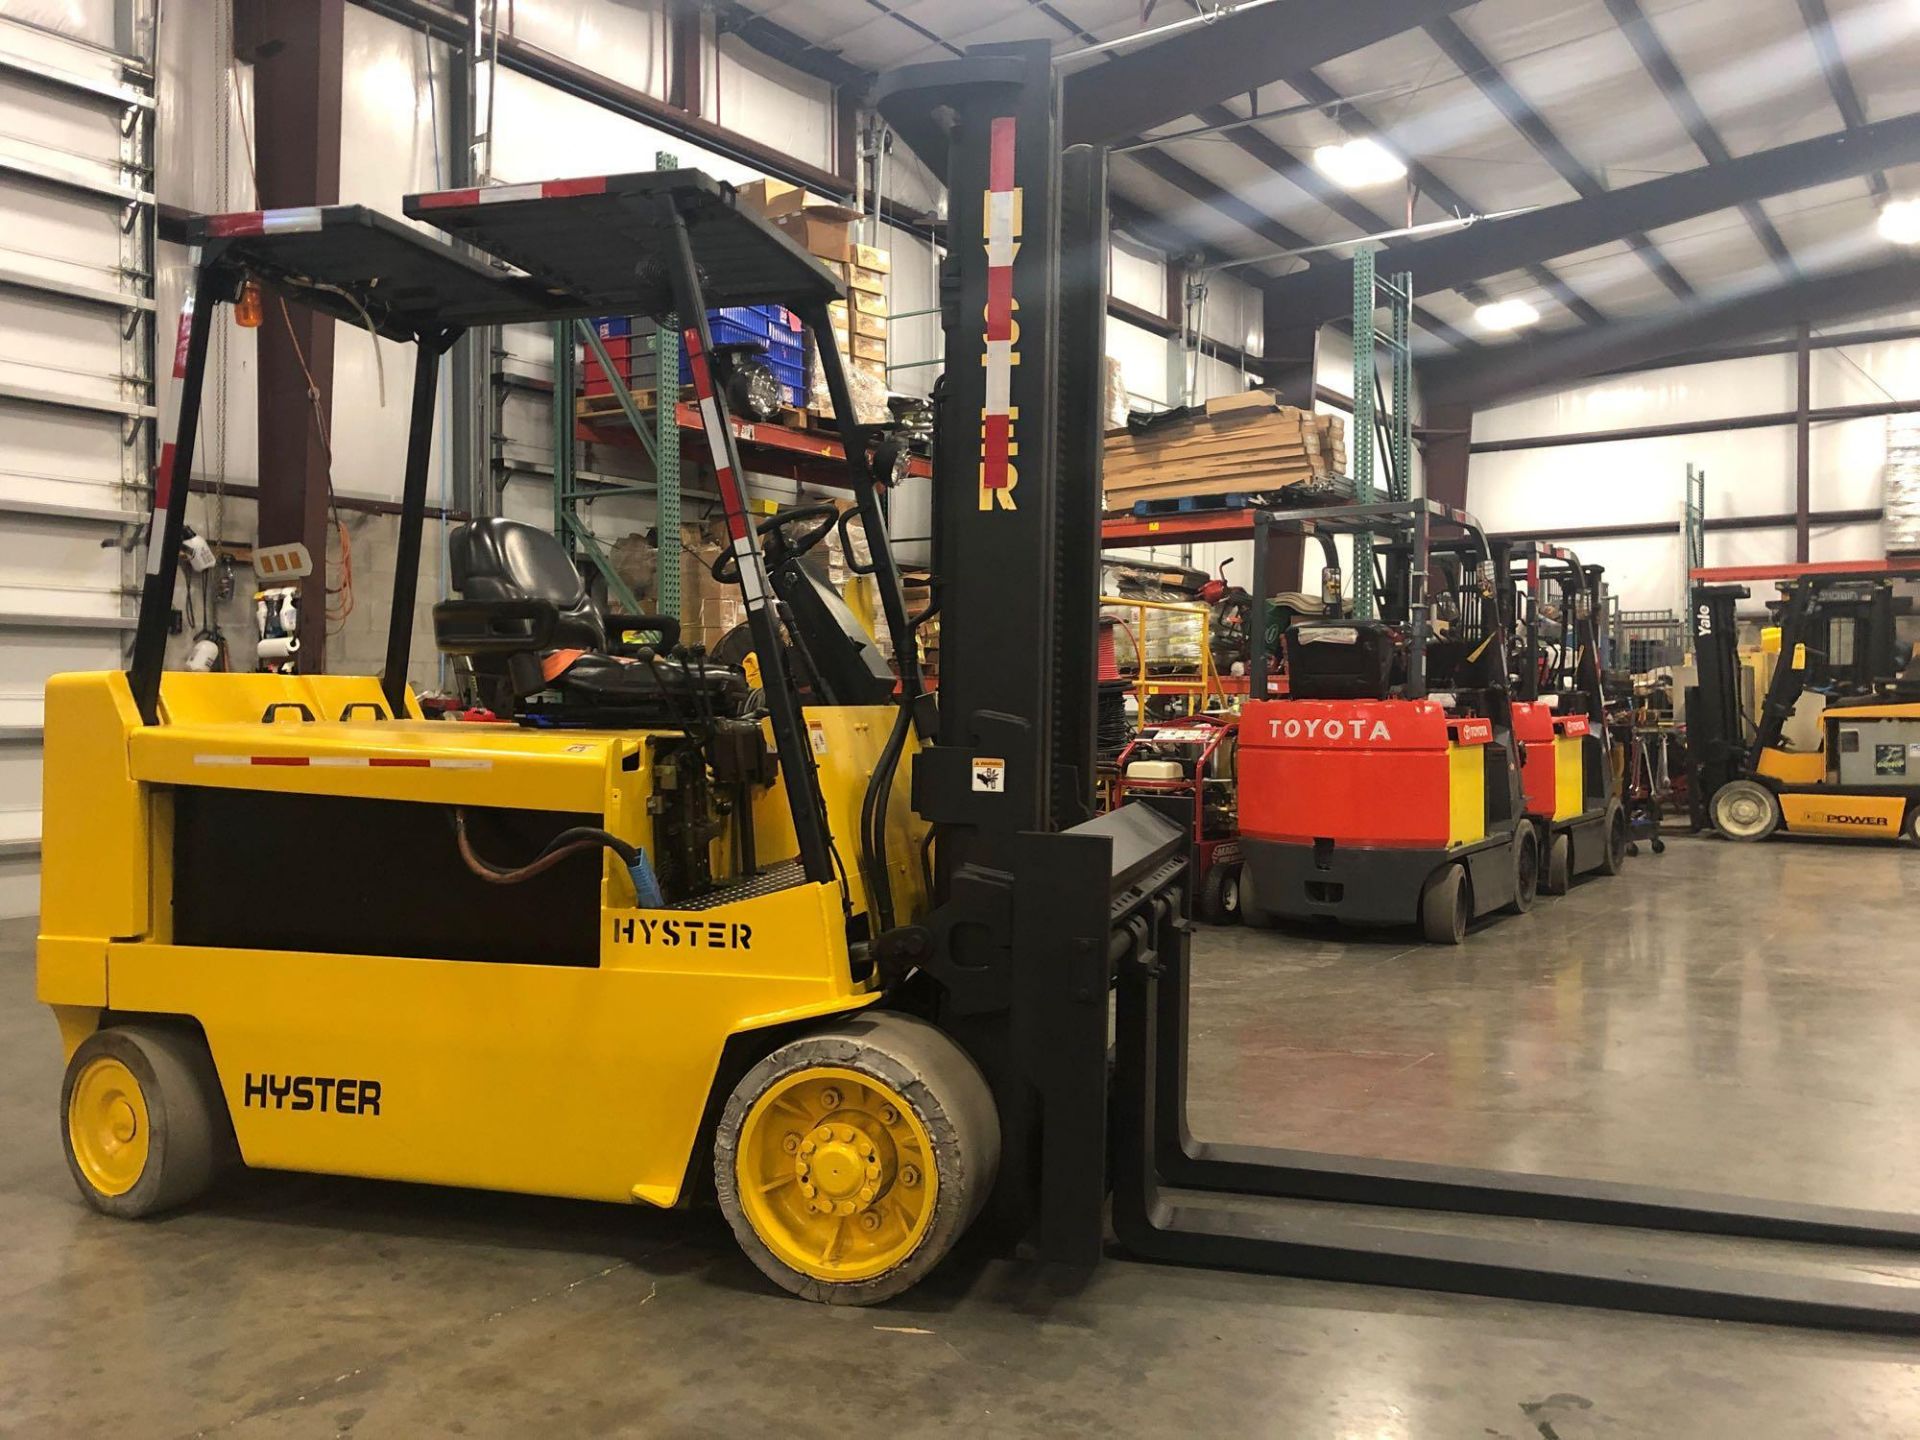 HYSTER ELECTRIC FORKLIFT MODEL E120XL, APPROX. 12,000 LB CAPACITY - Image 4 of 8